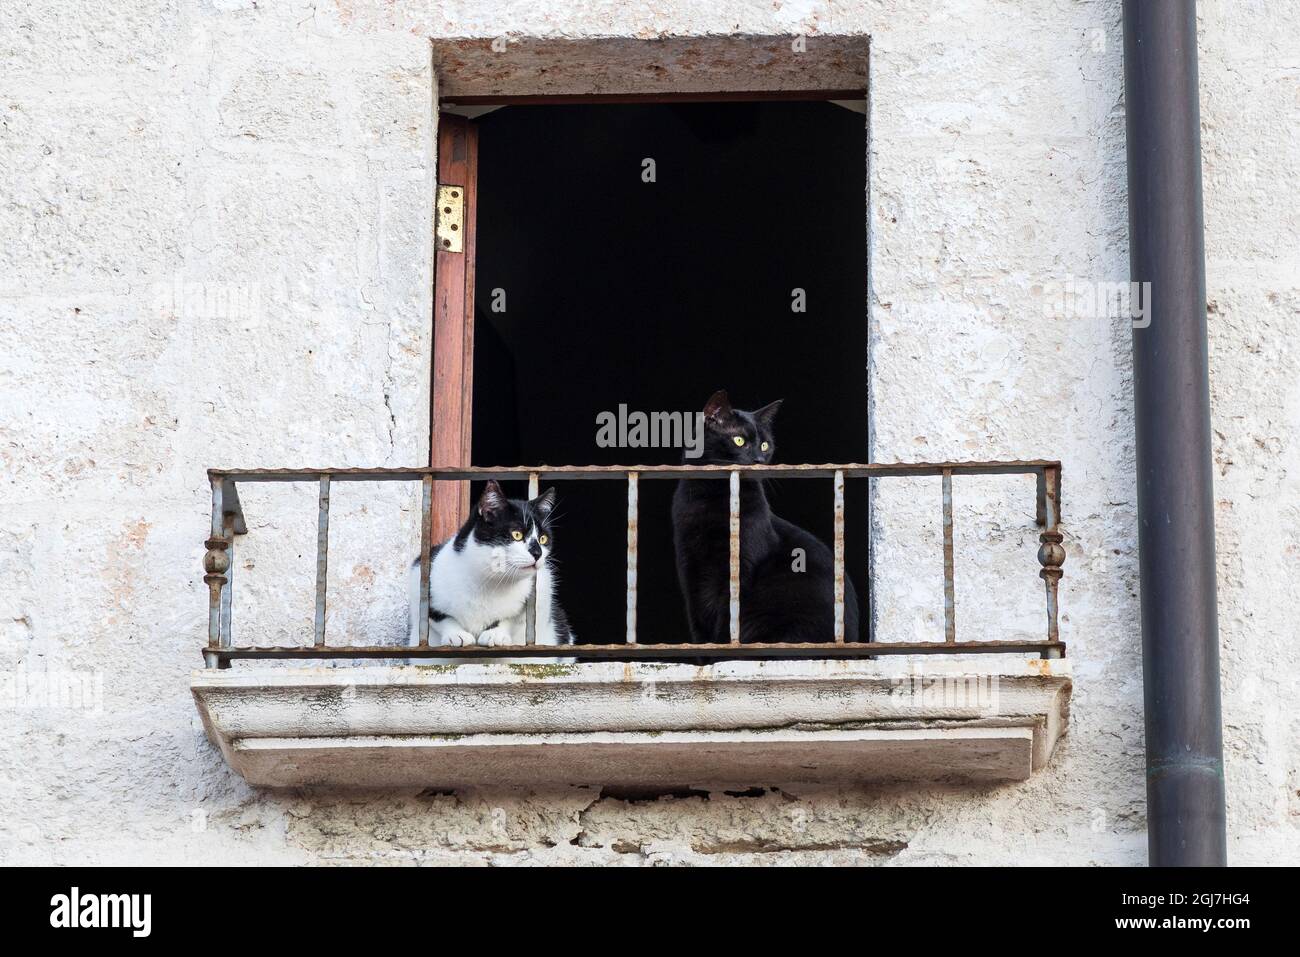 Italy, Apulia, Metropolitan City of Bari, Bari. Two cats looking out from a window ledge. Stock Photo